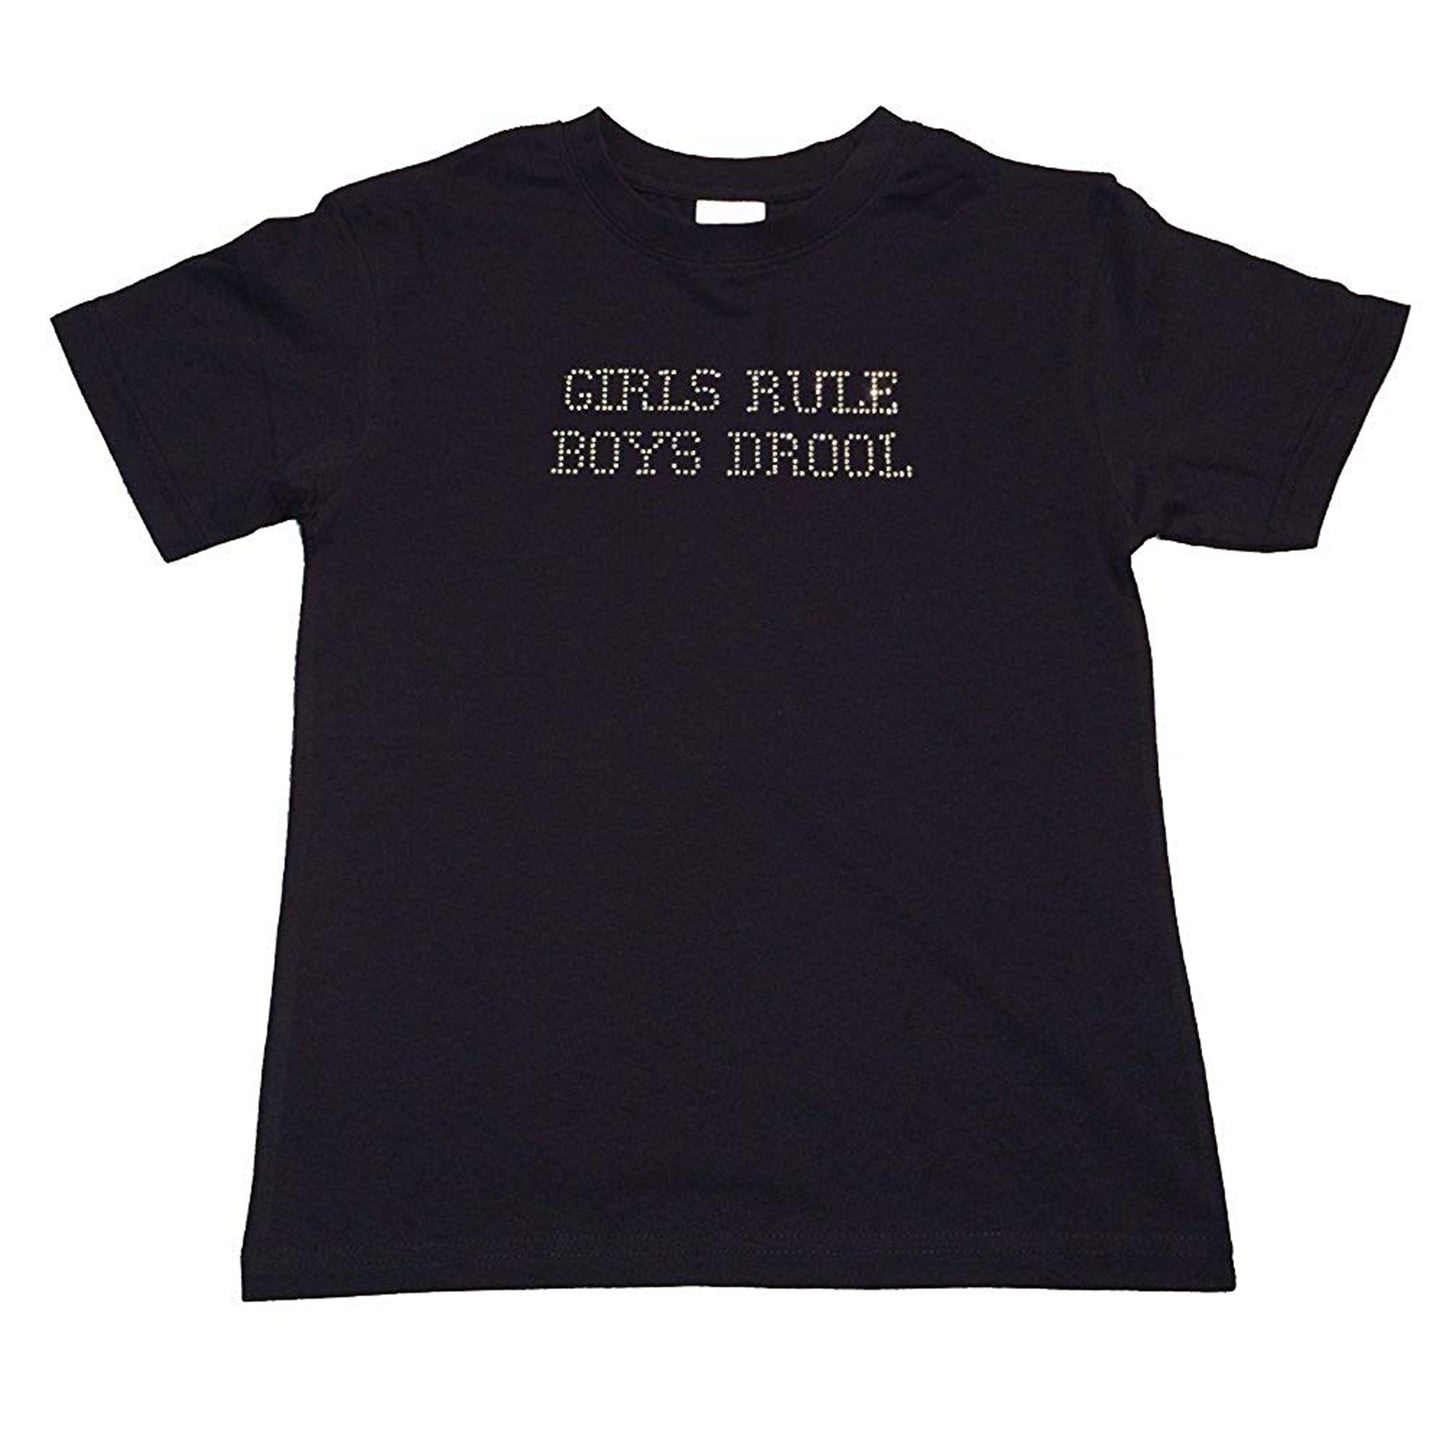 Girls Rhinestone T-Shirt " Girls Rule Boys Drool " Kids Size 3 to 14 Available